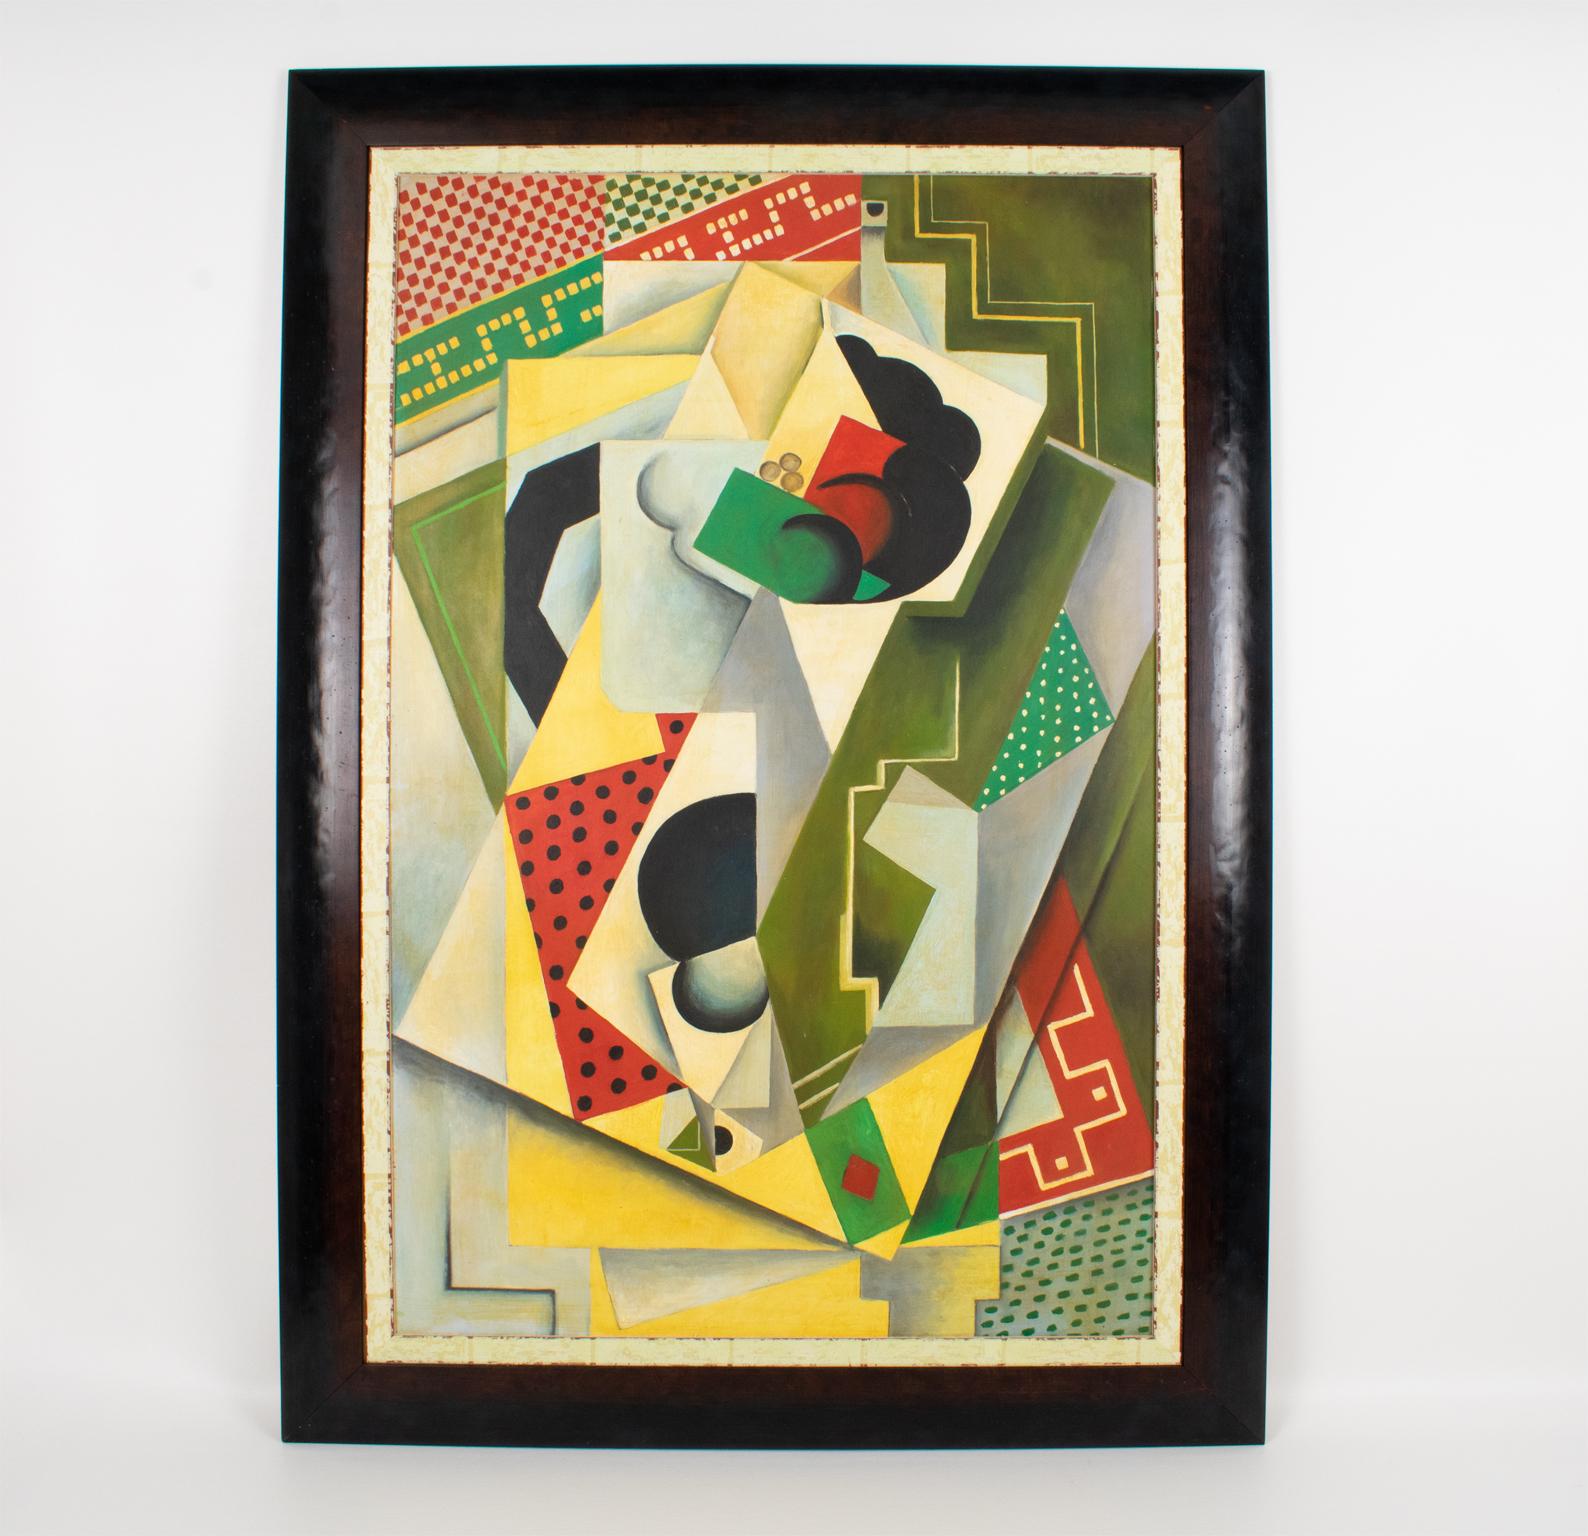 A stunning Art Deco cubist gouache on cardboard painting from a Russian Artist in Paris (20th Century). The artwork shows no visible signature. This is a typical example of the Russian Cubist school of Paris, but this painting is special because it